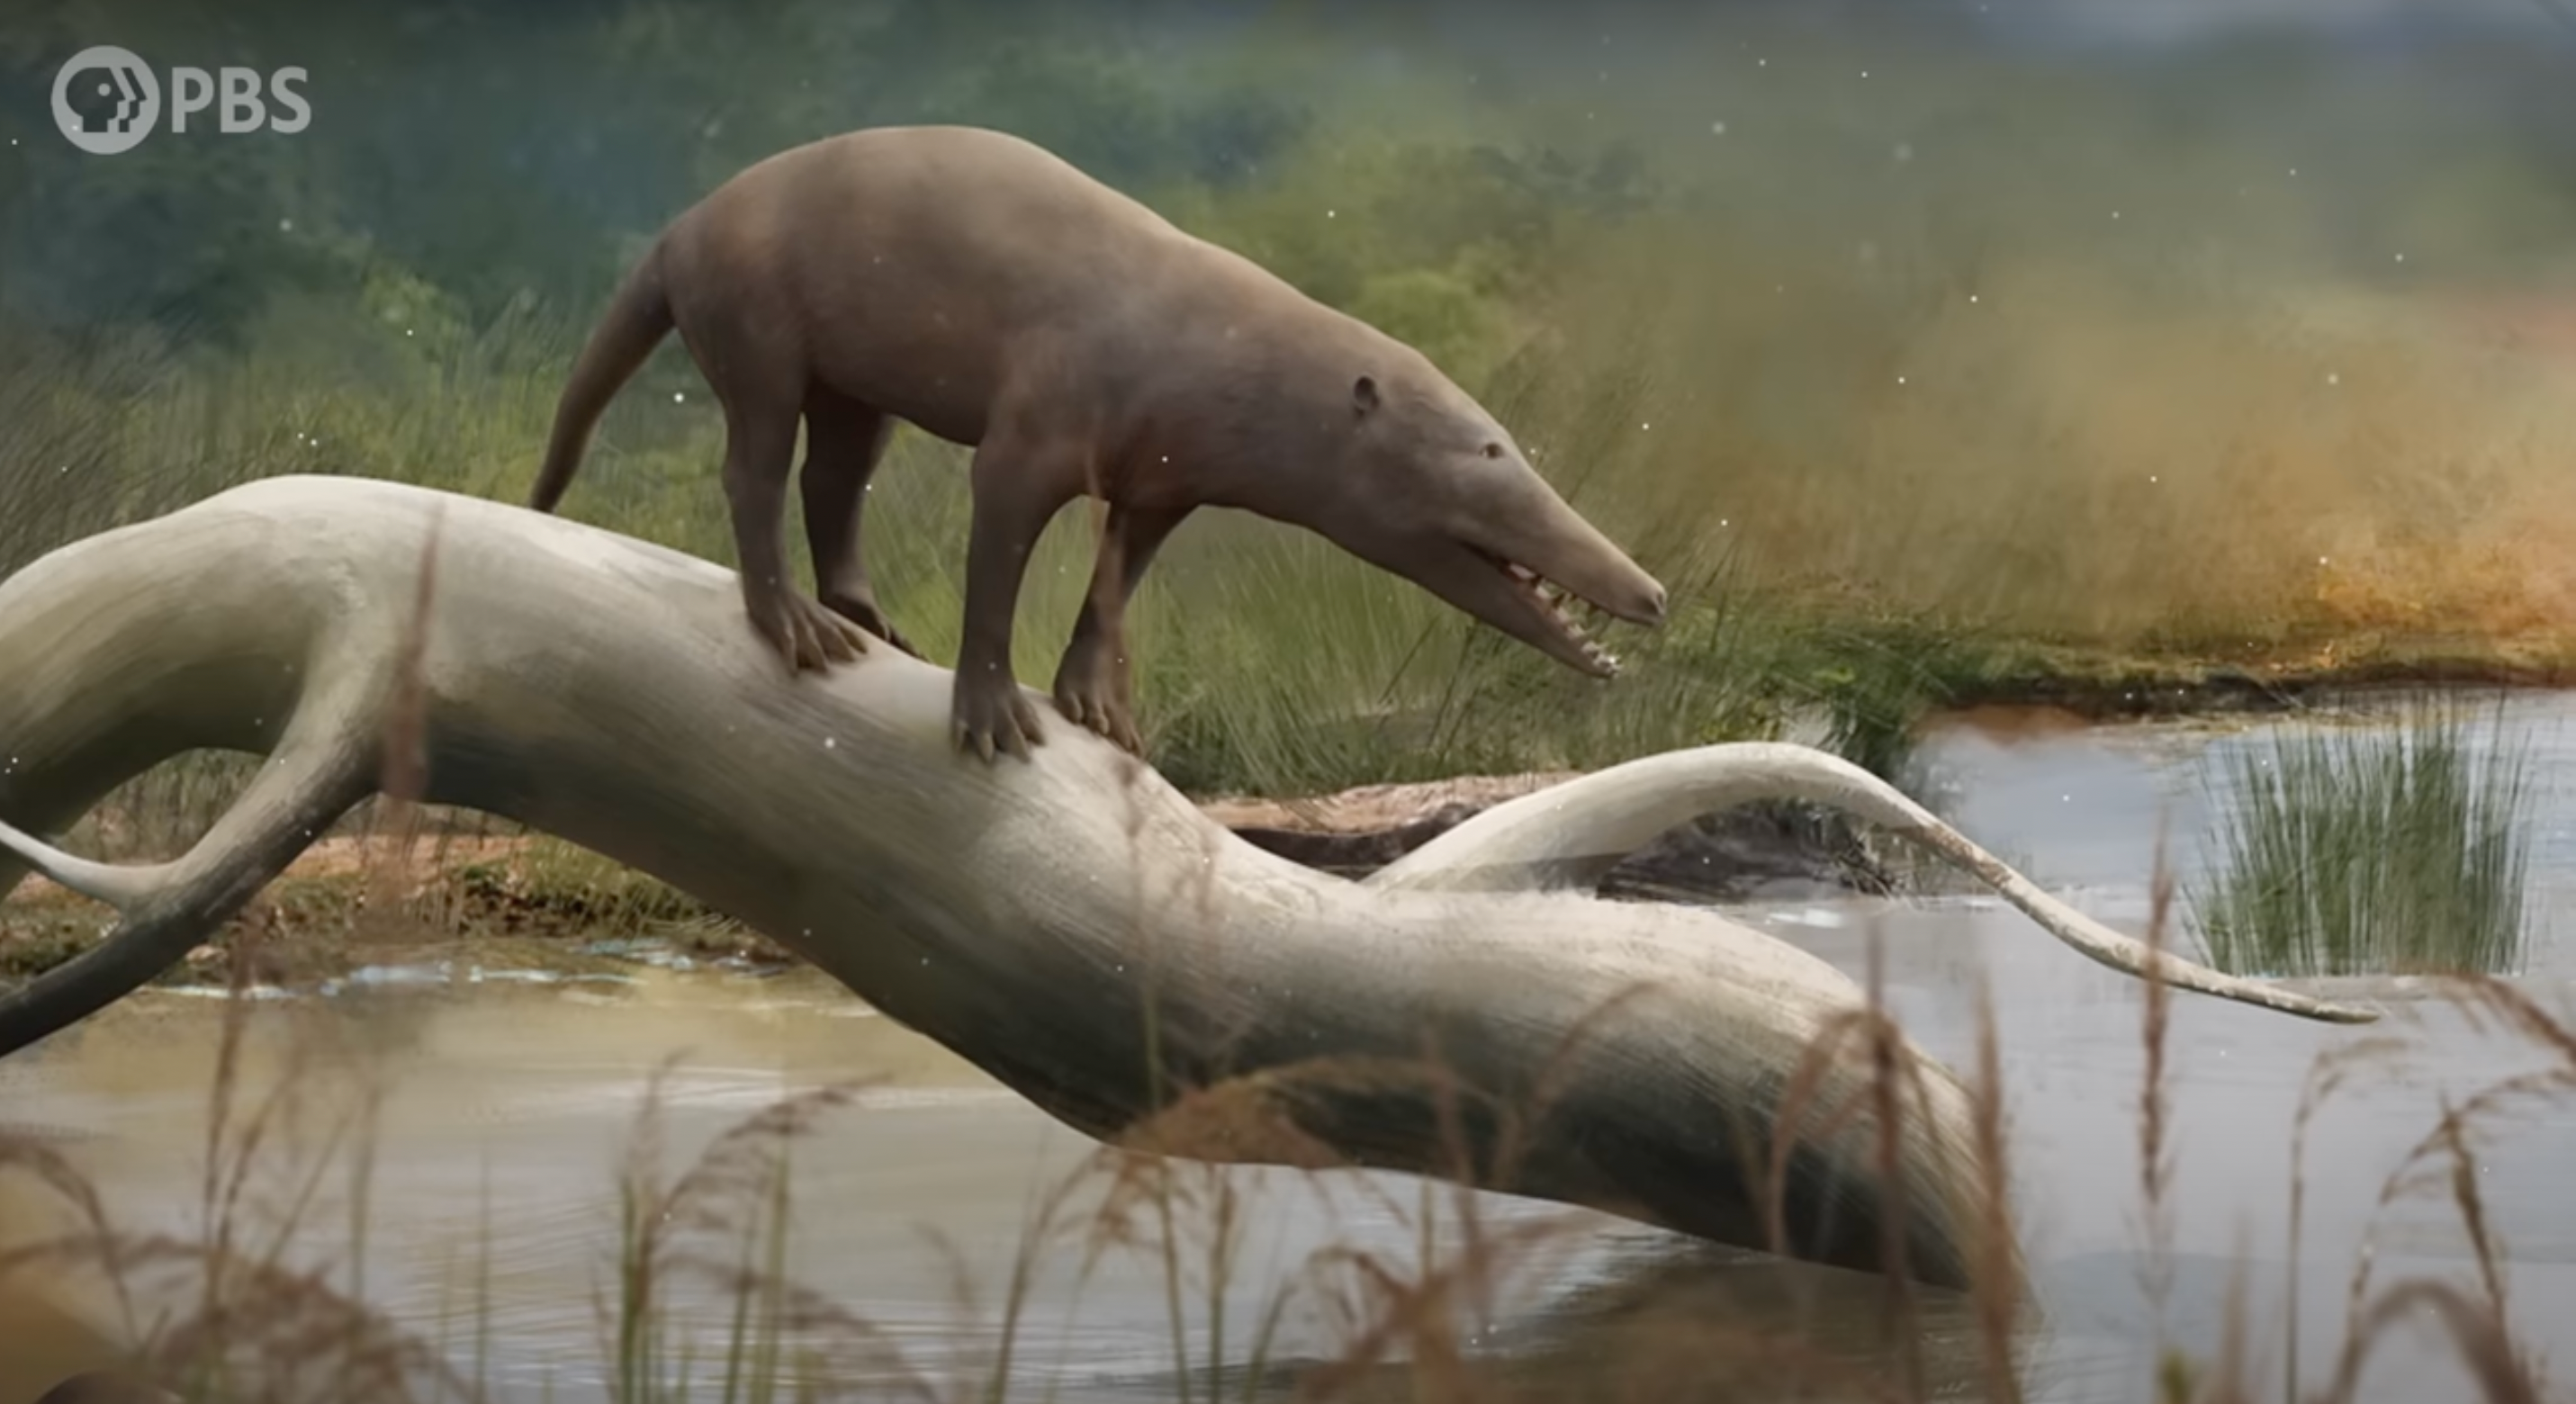 PBS video shows how wolves evolved from whales - Upworthy